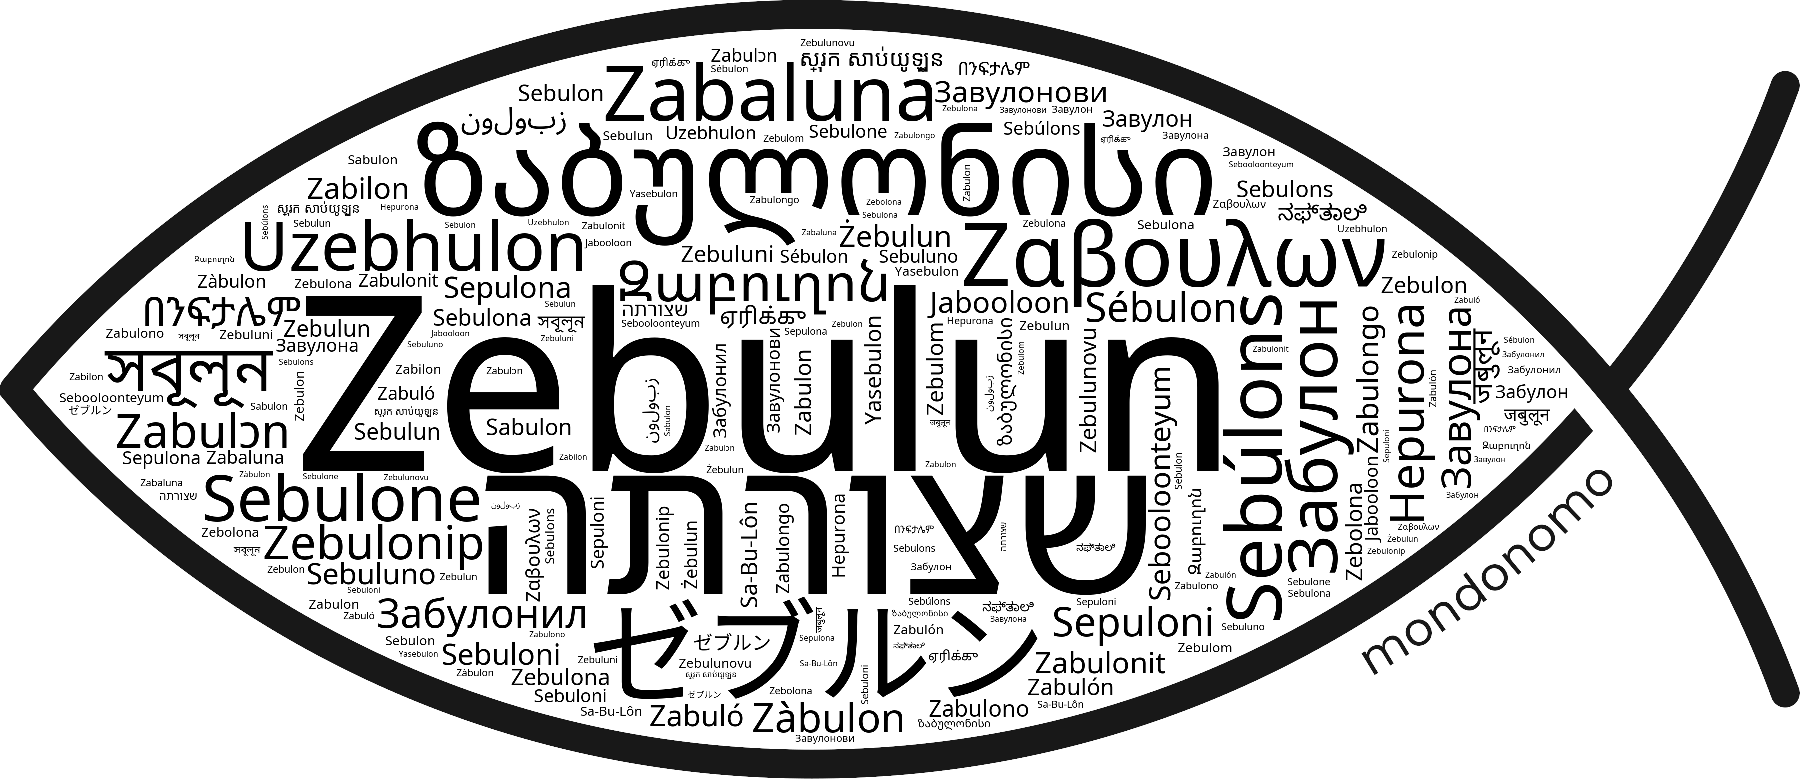 Name Zebulun in the world's Bibles